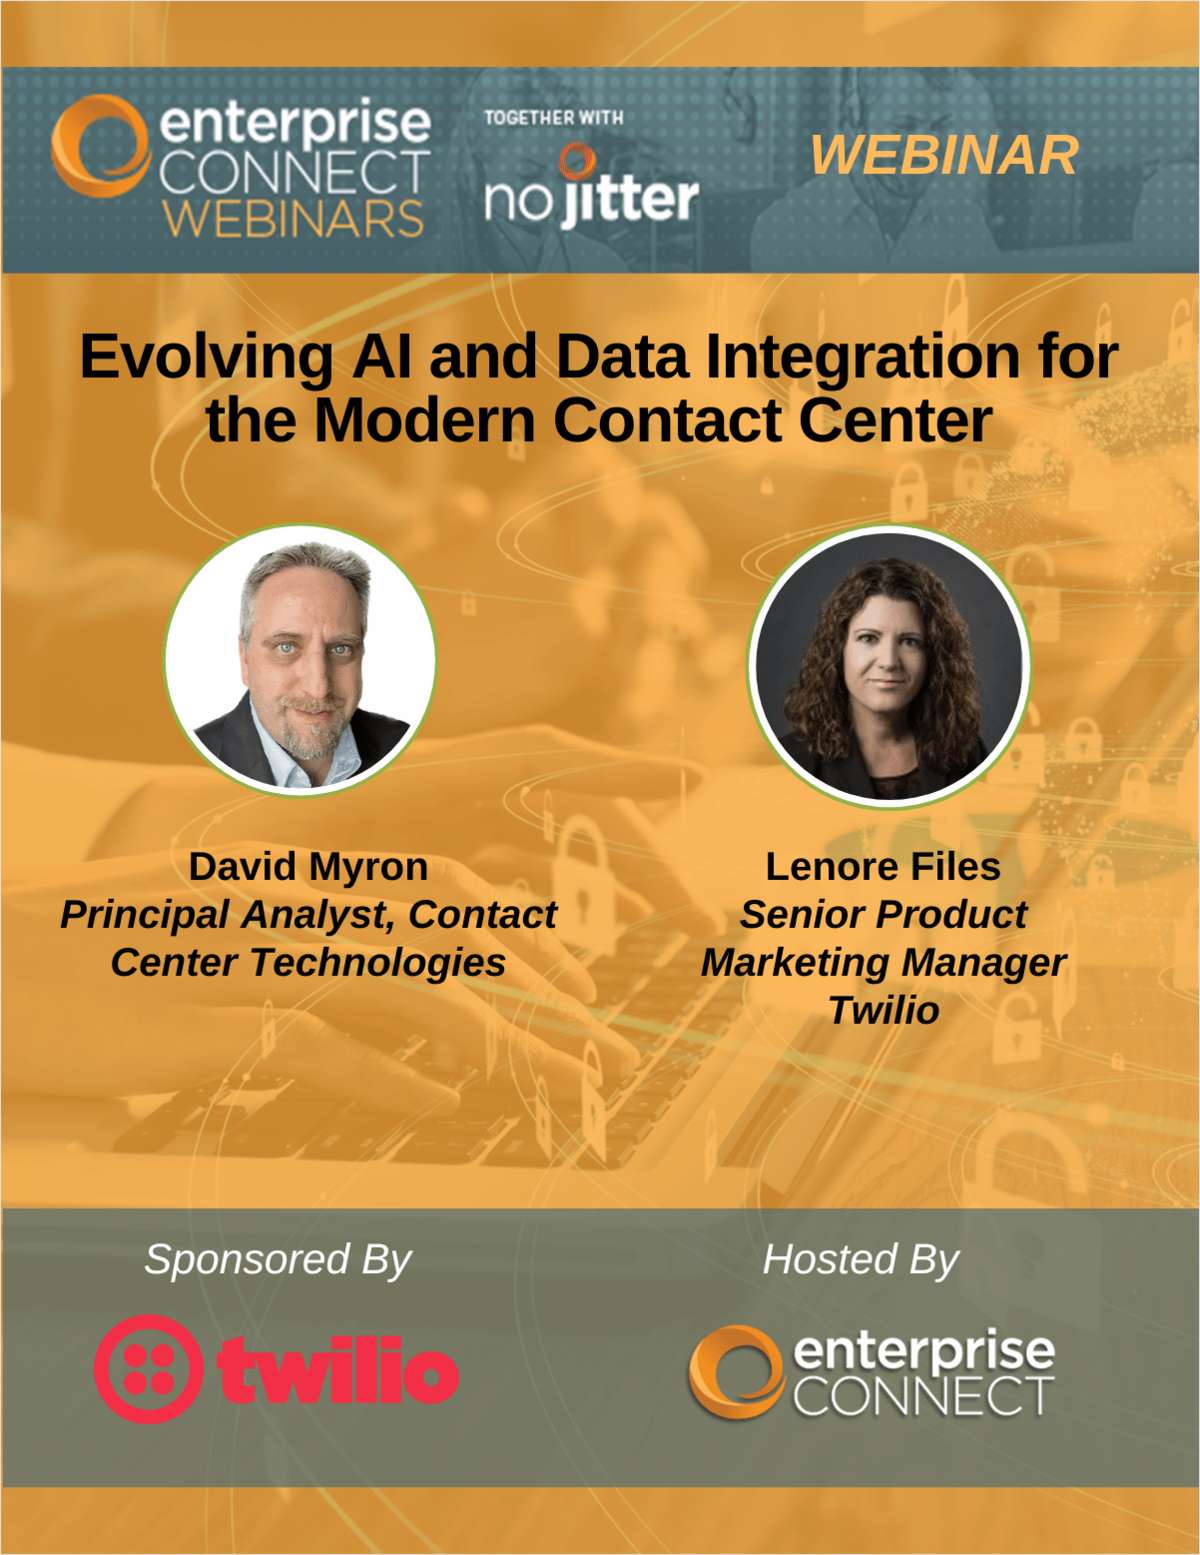 Evolving AI and Data Integration for the Modern Contact Center